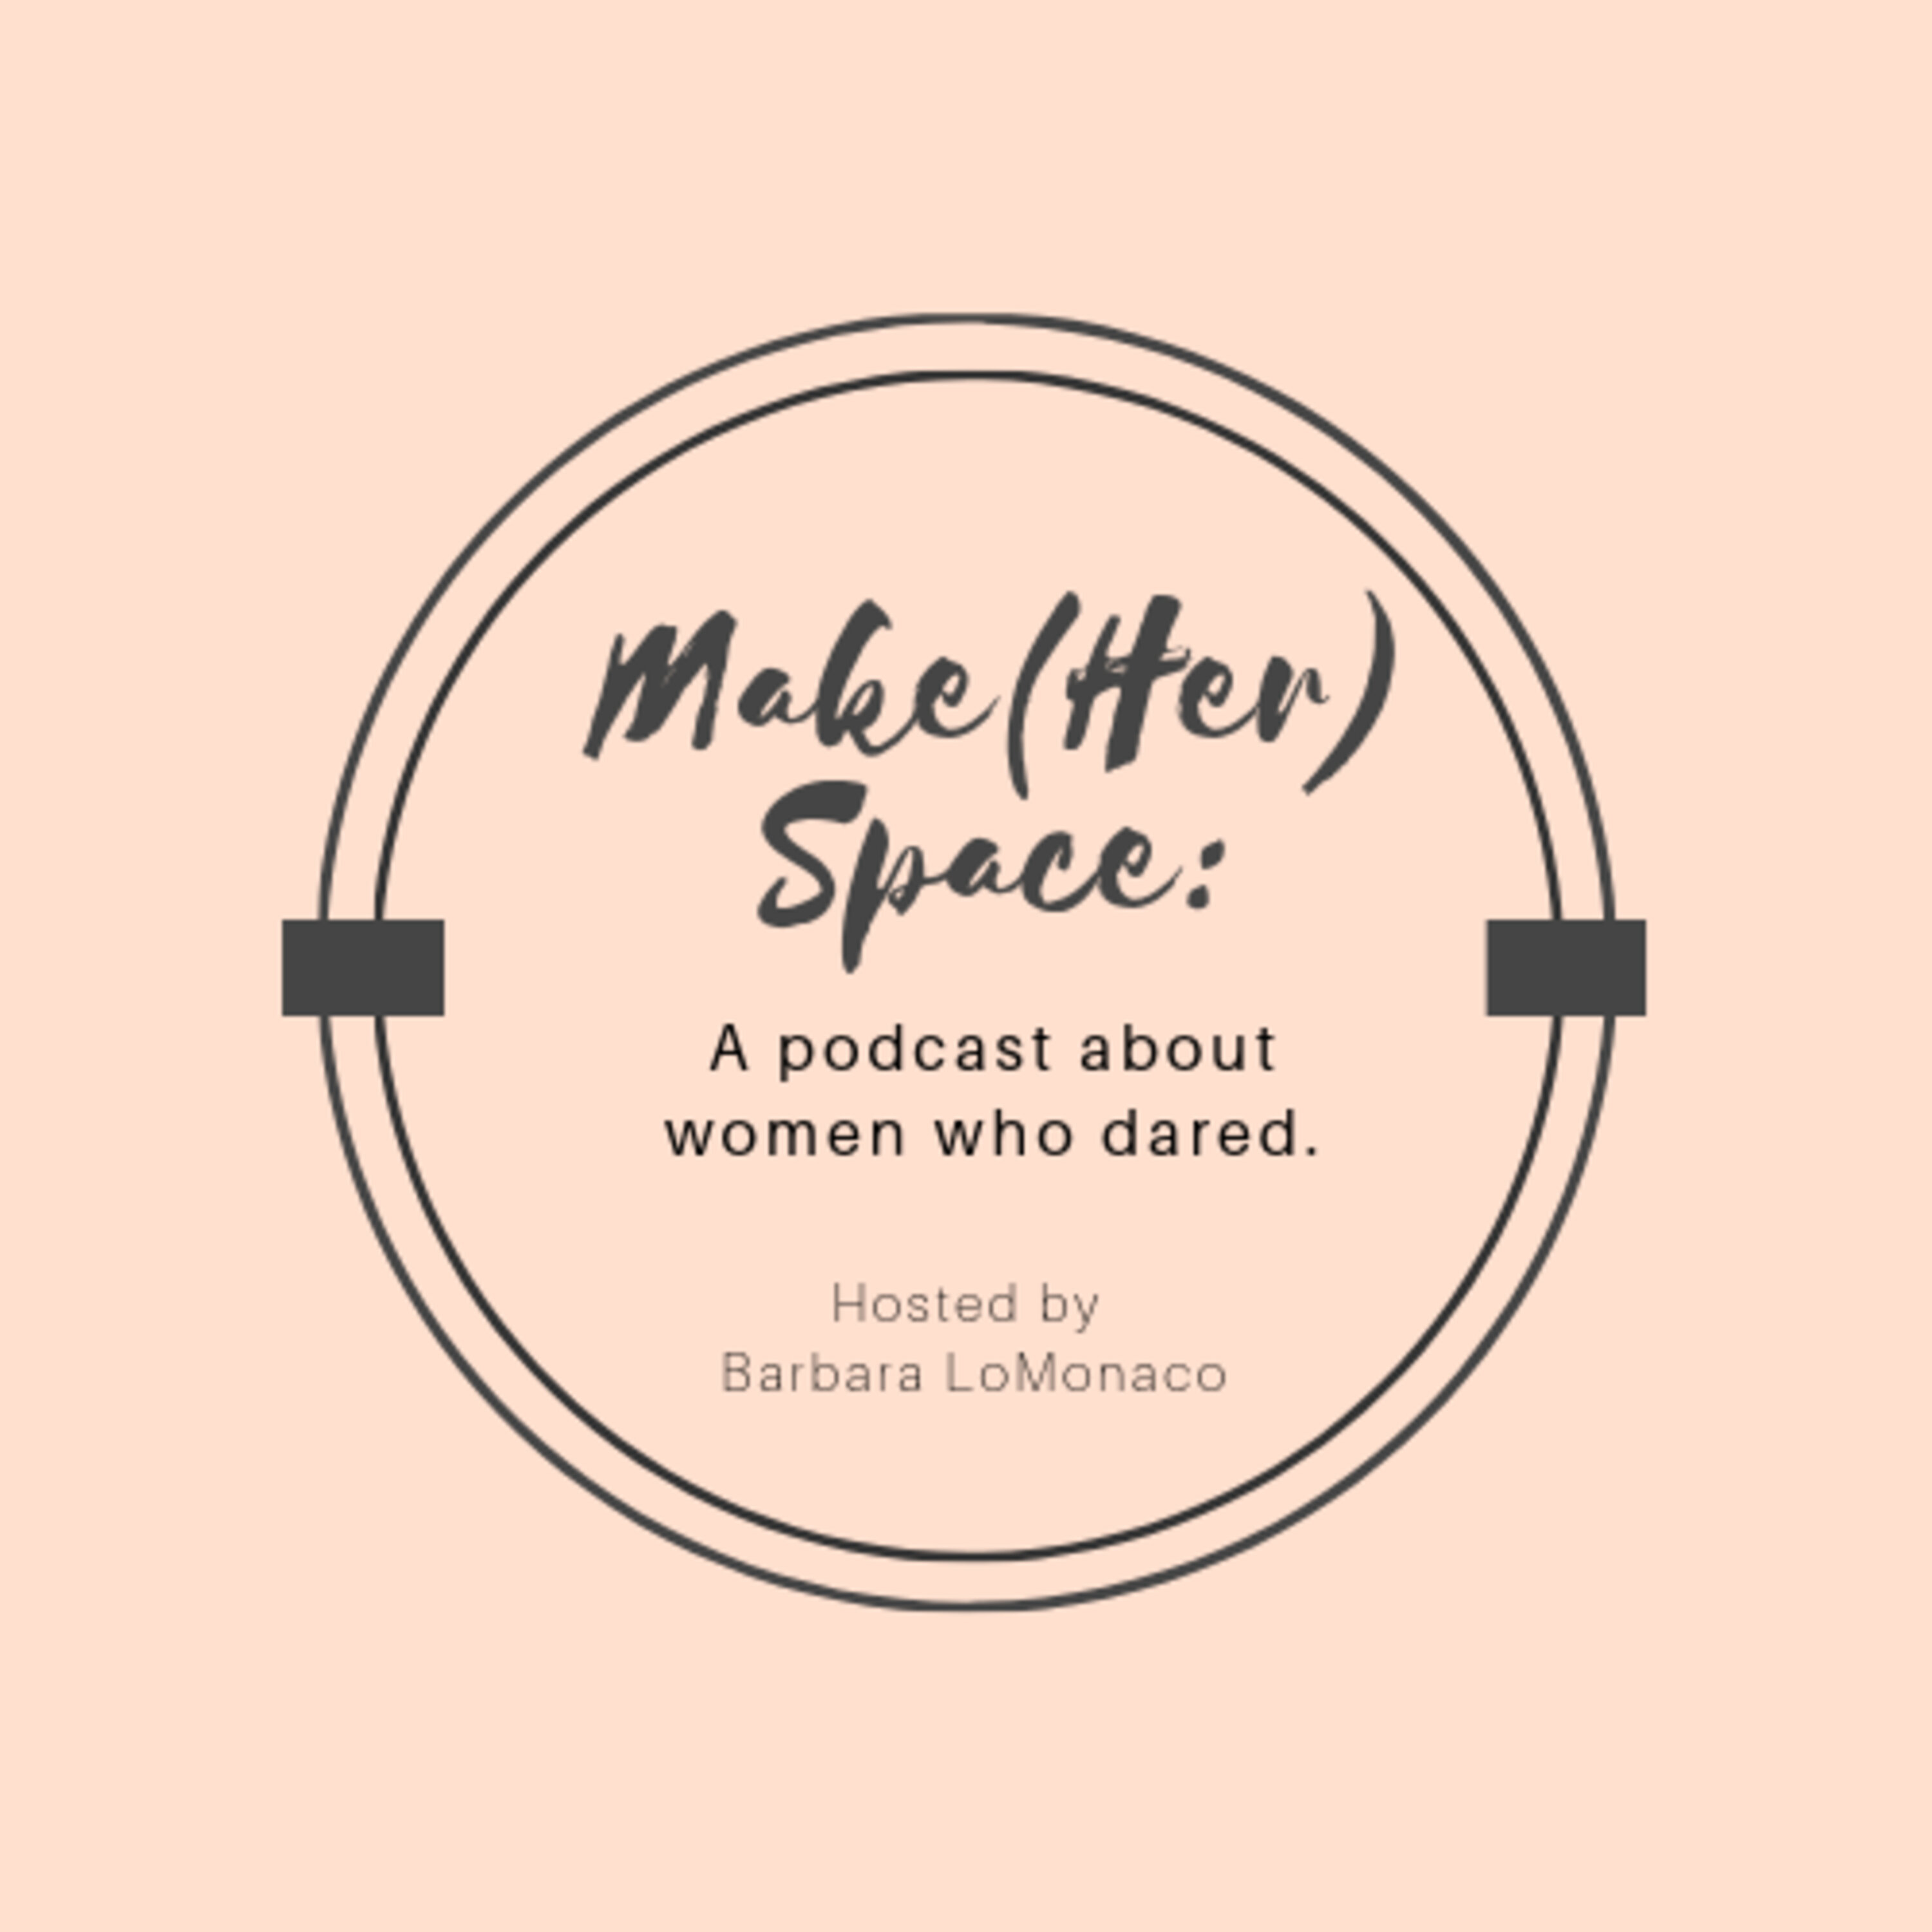 Welcome to Make Her Space